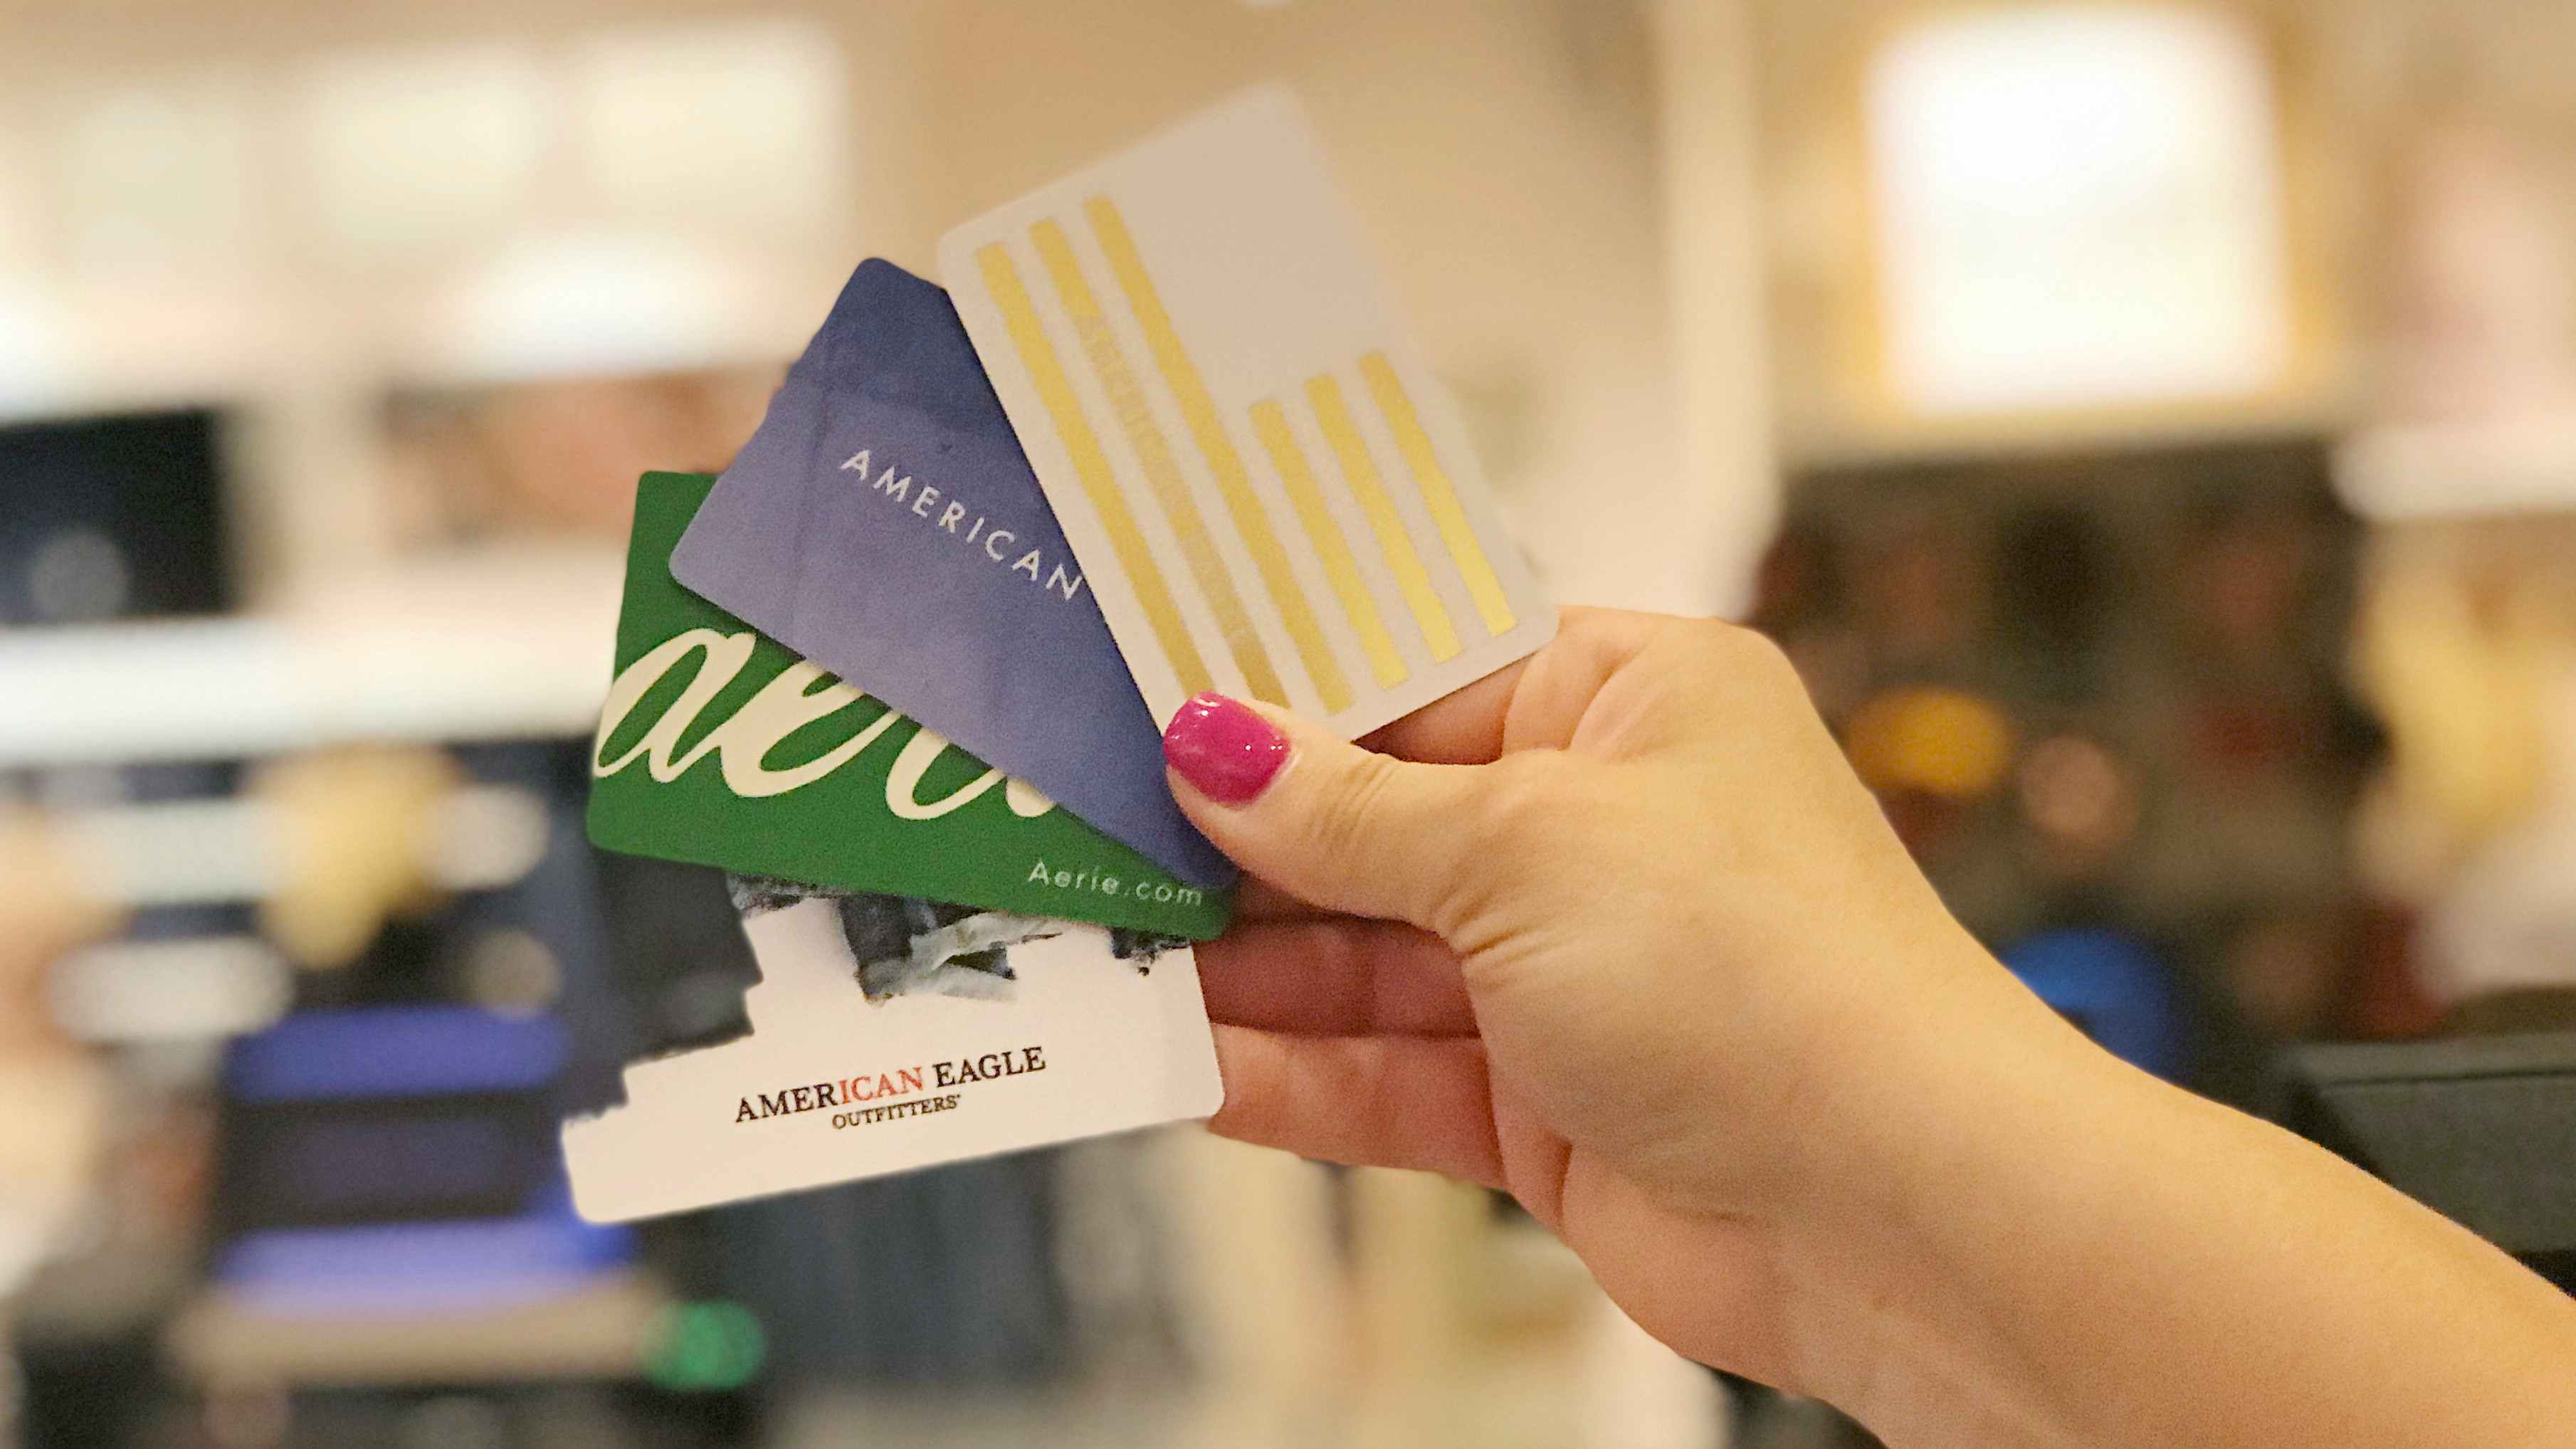 a woman holding up multiple american eagle and aerie gift cards in the store